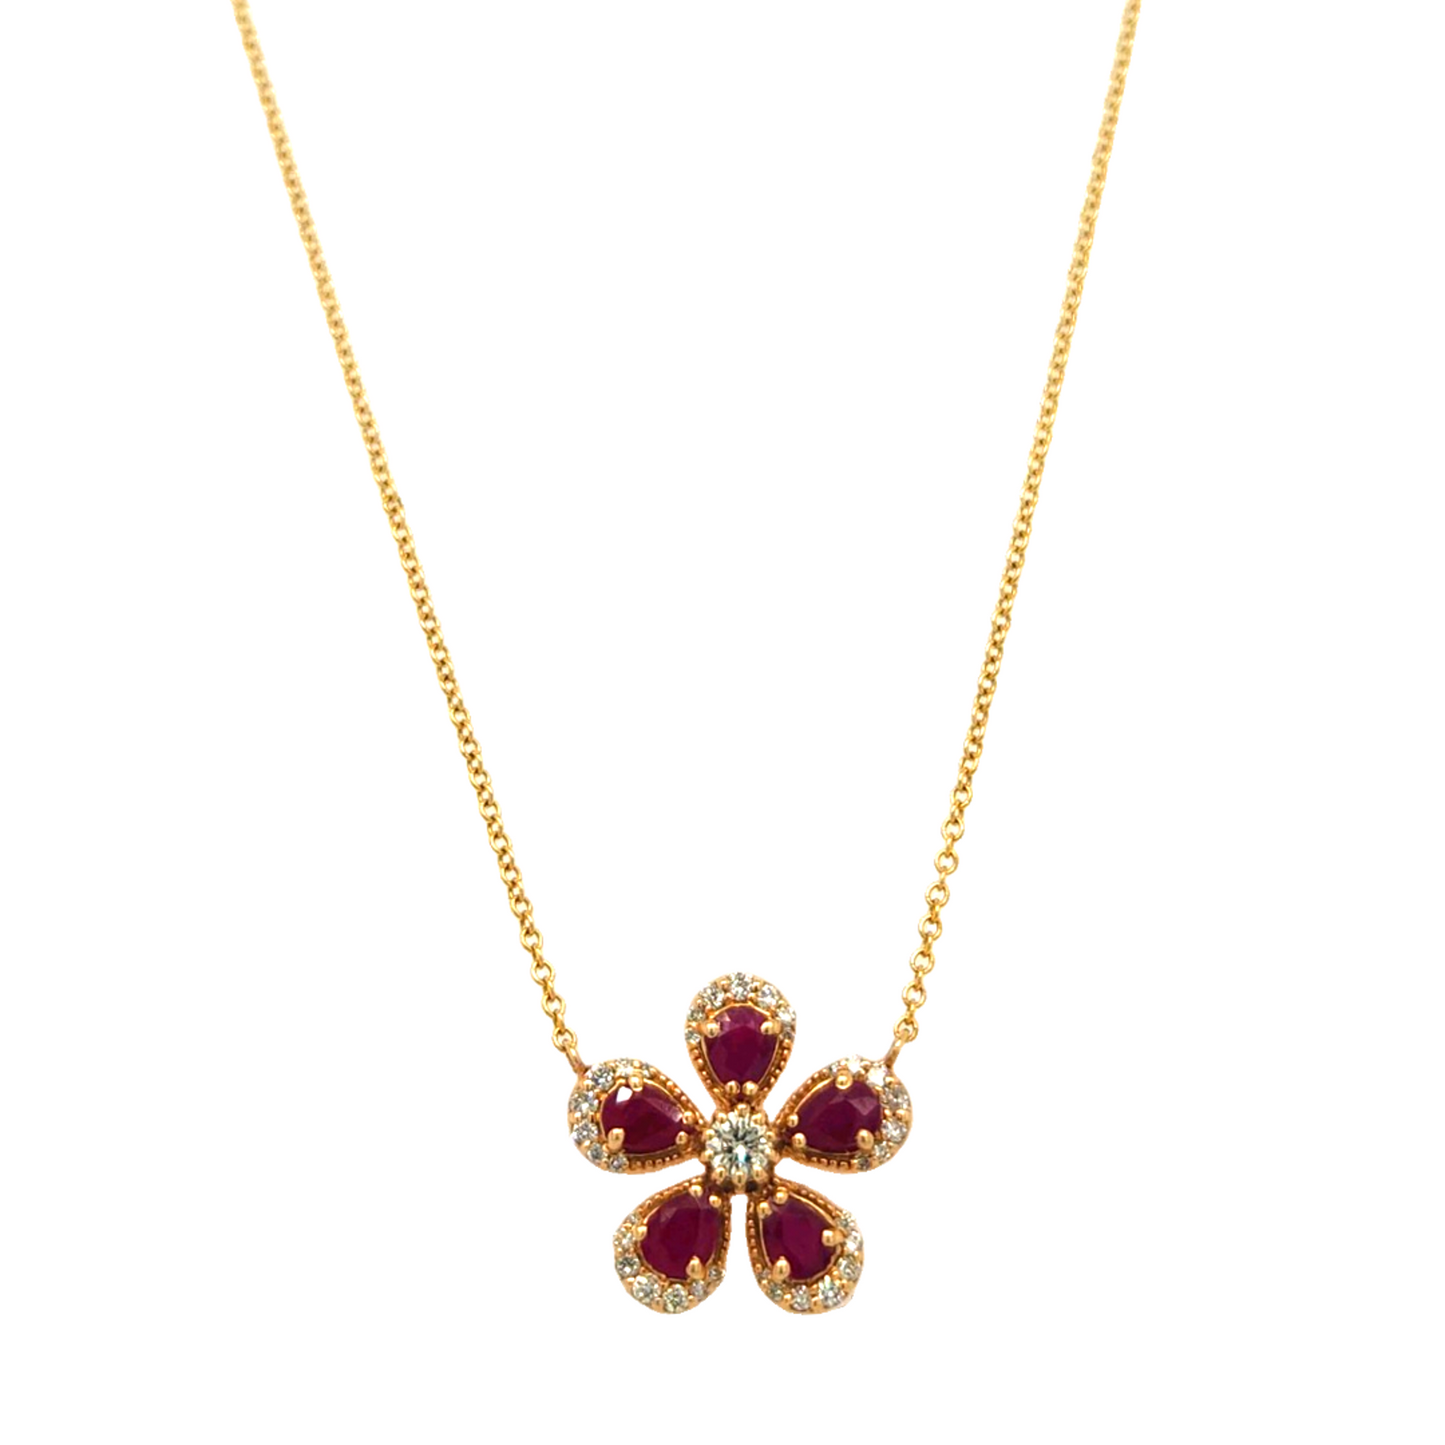 Chain Necklace With Ruby & Diamond Flower